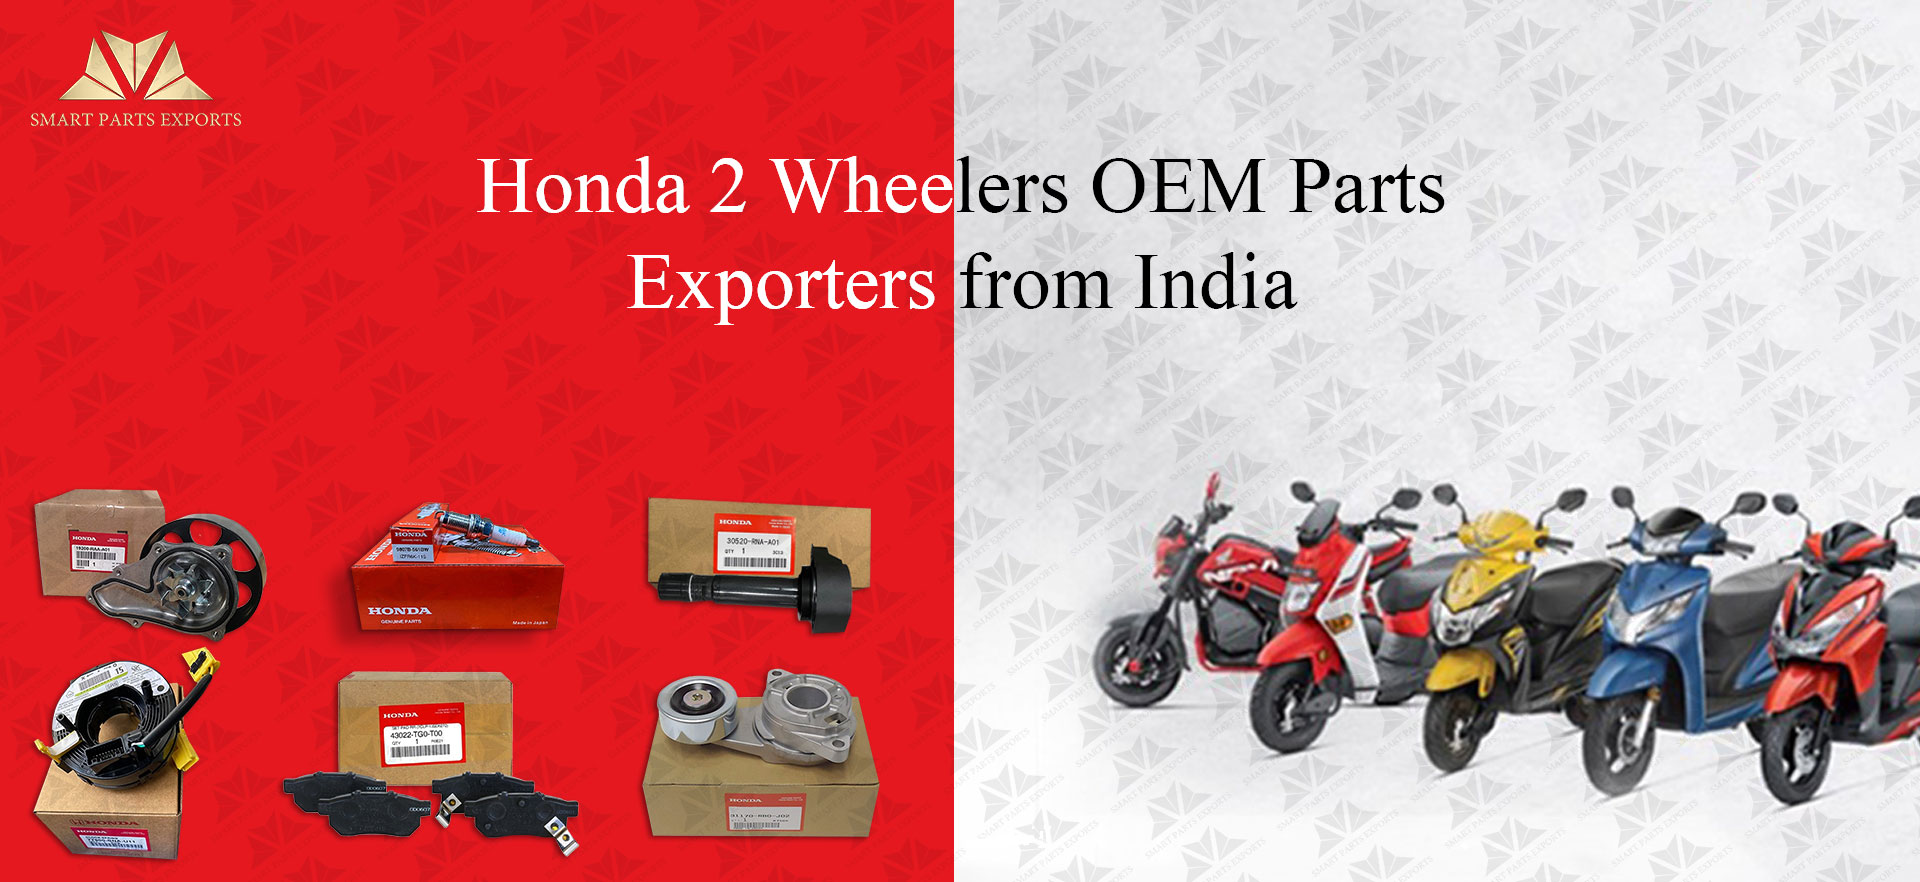 Honda 2 Wheelers OEM Parts Exporters from India